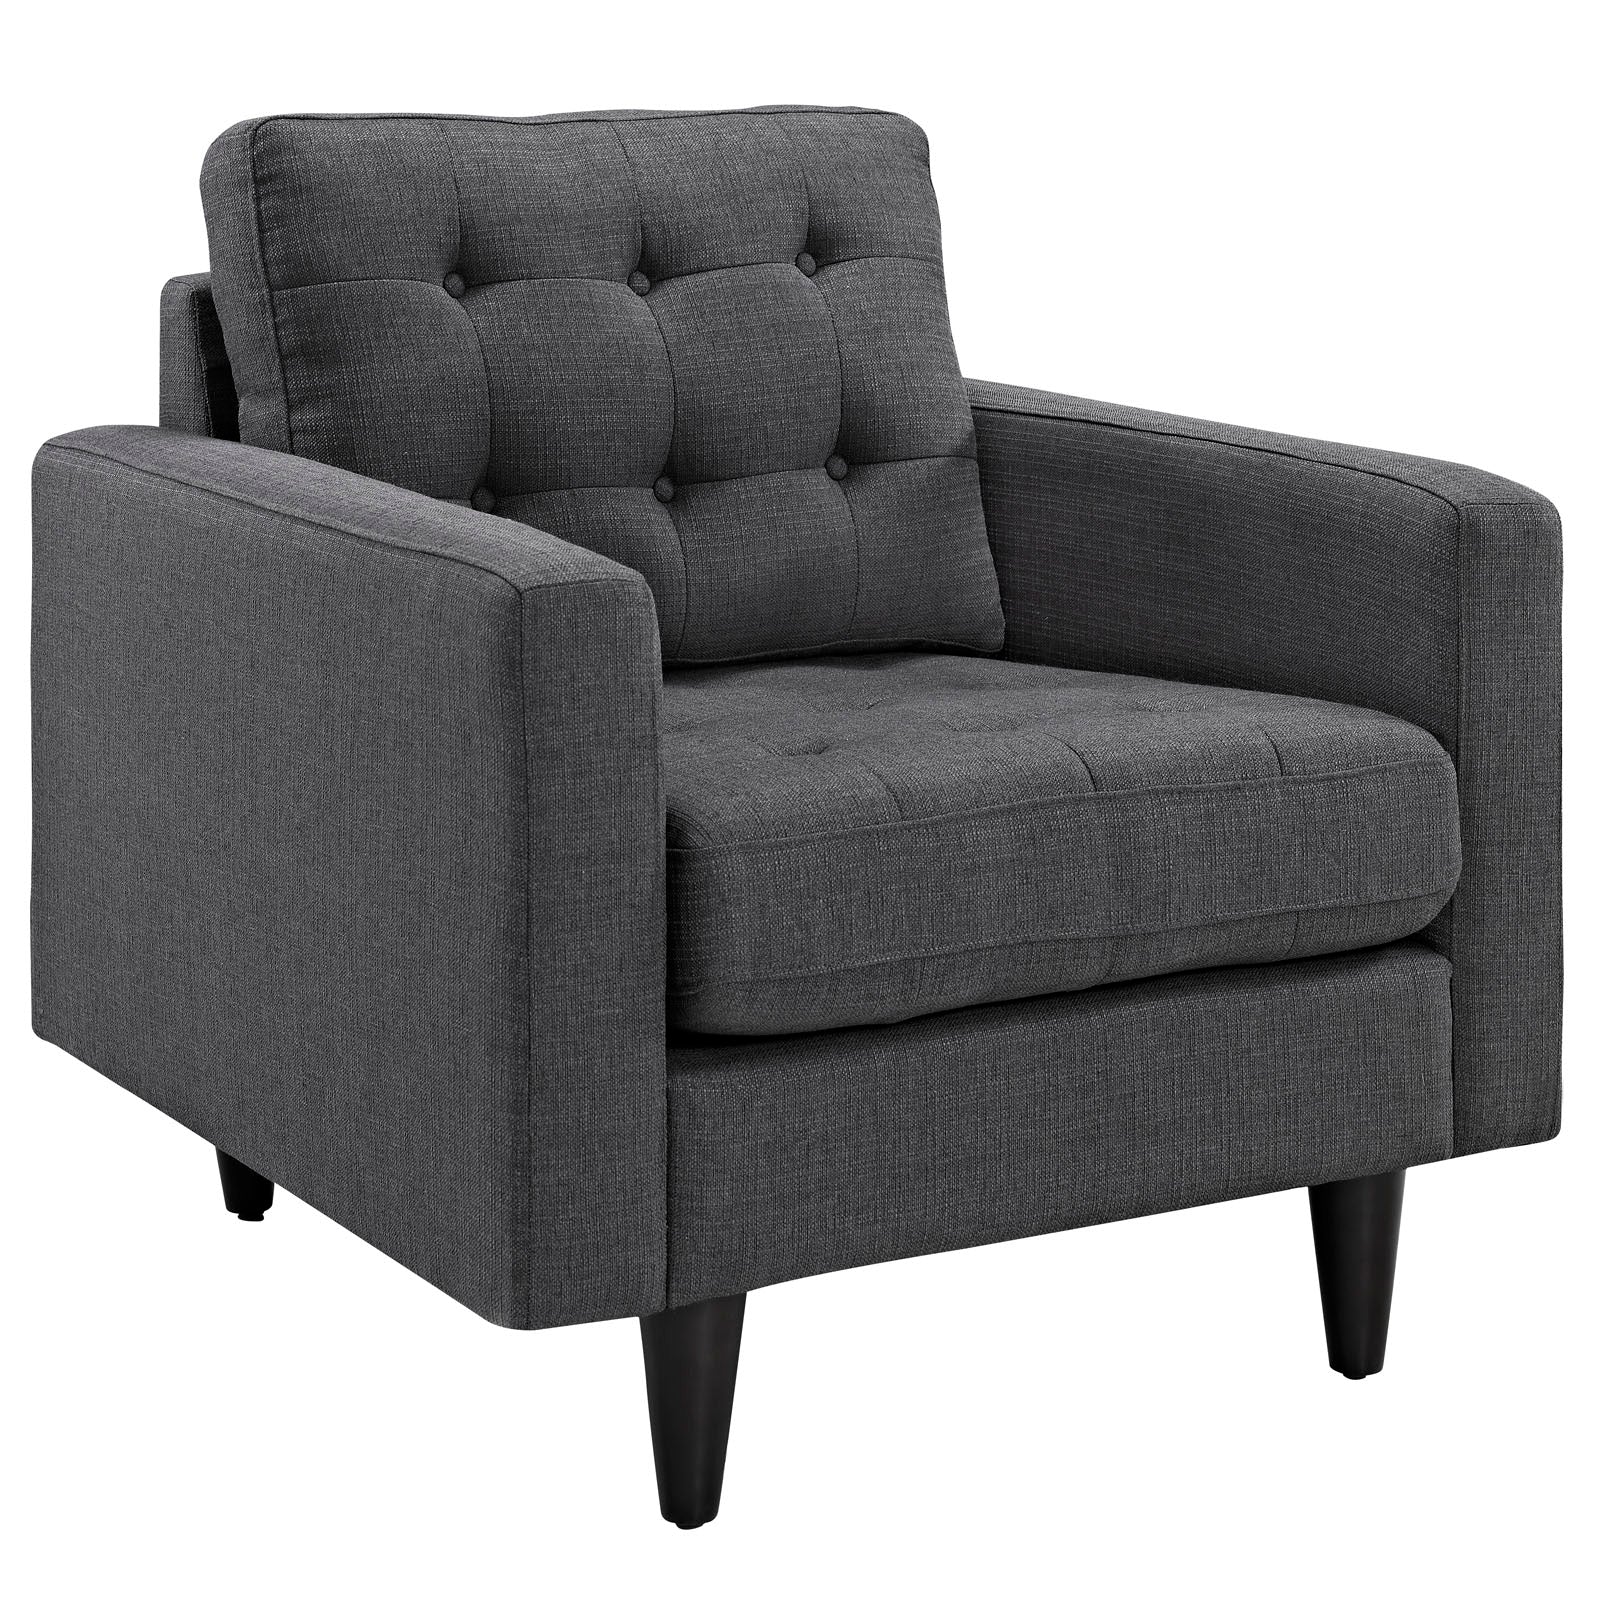 Modway Living Room Sets - Empress Armchair And Sofa Set Of 2 Gray